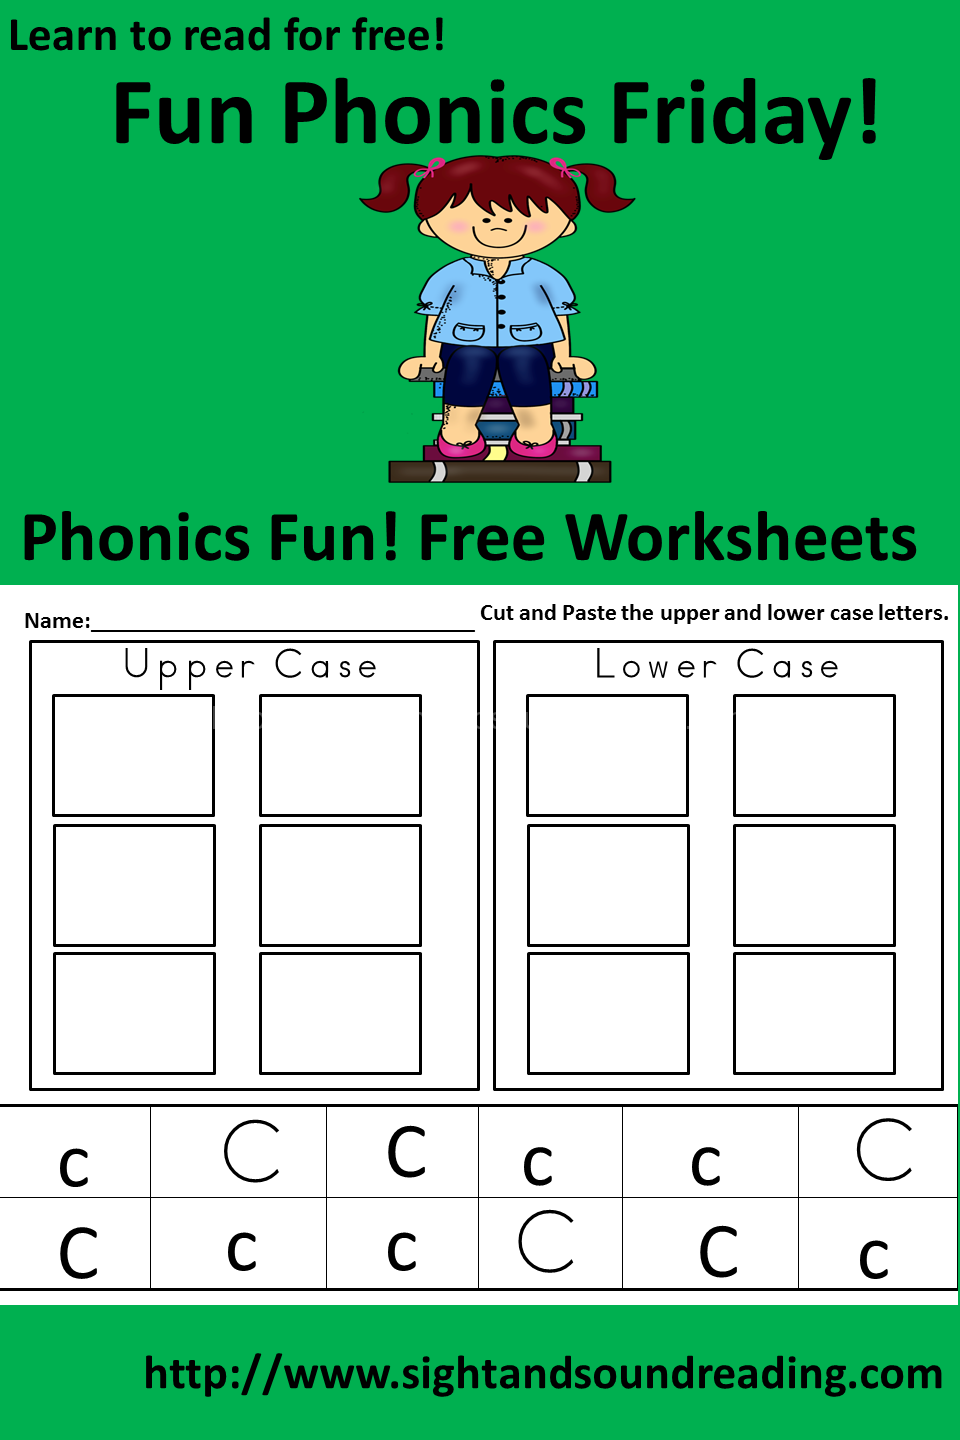 Free Worksheet to help teach the letter Cc